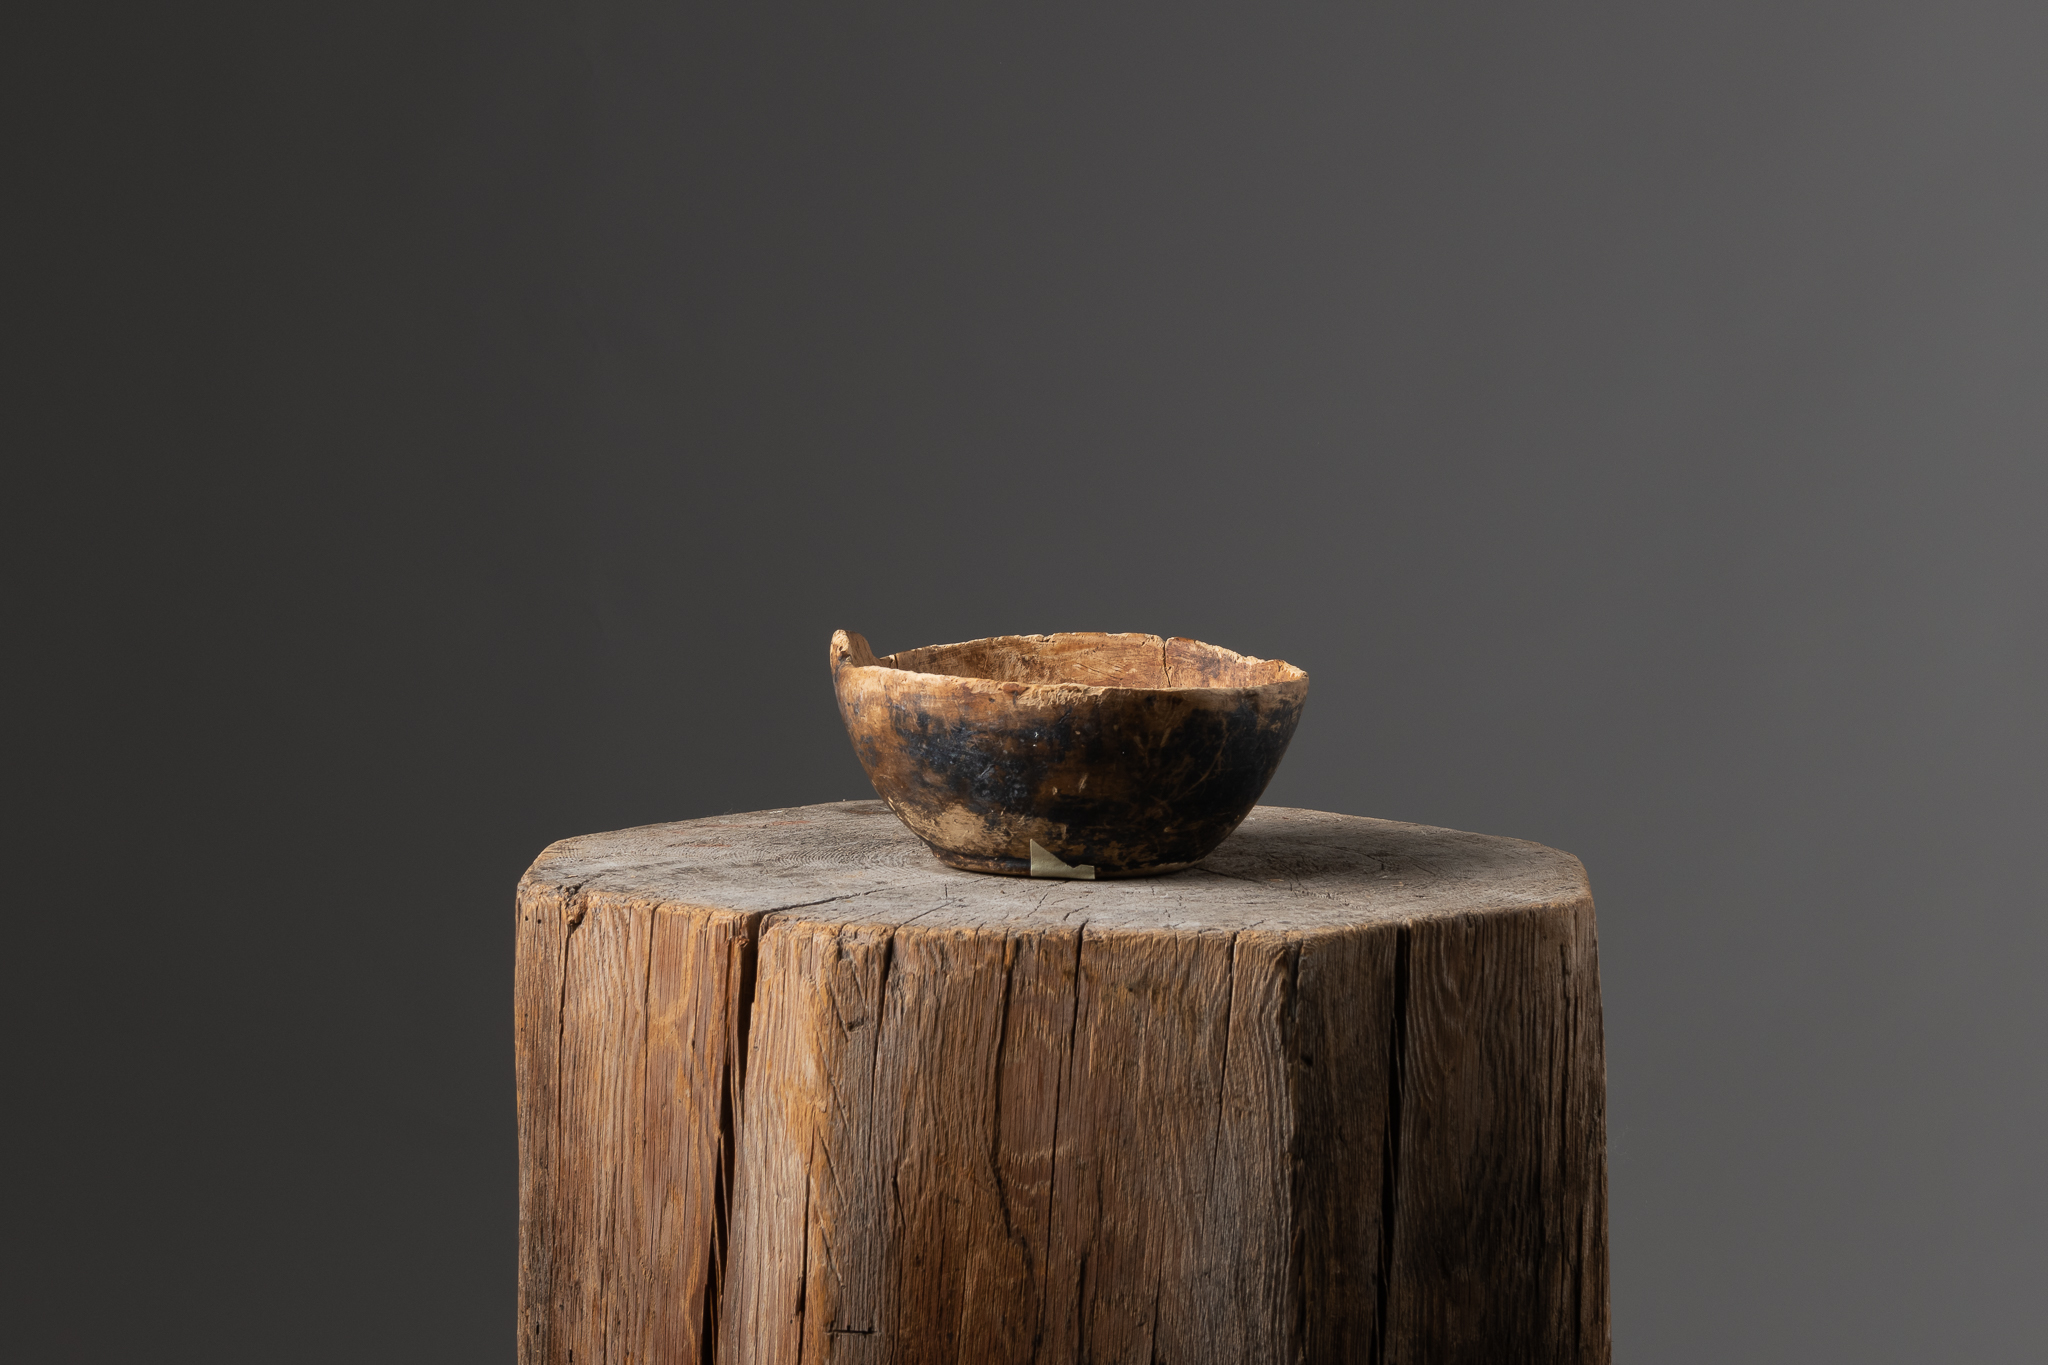 Rustic round wood bowl from Sweden made from a single piece of wood. The bowl has marks of use as well as a genuine patina of time